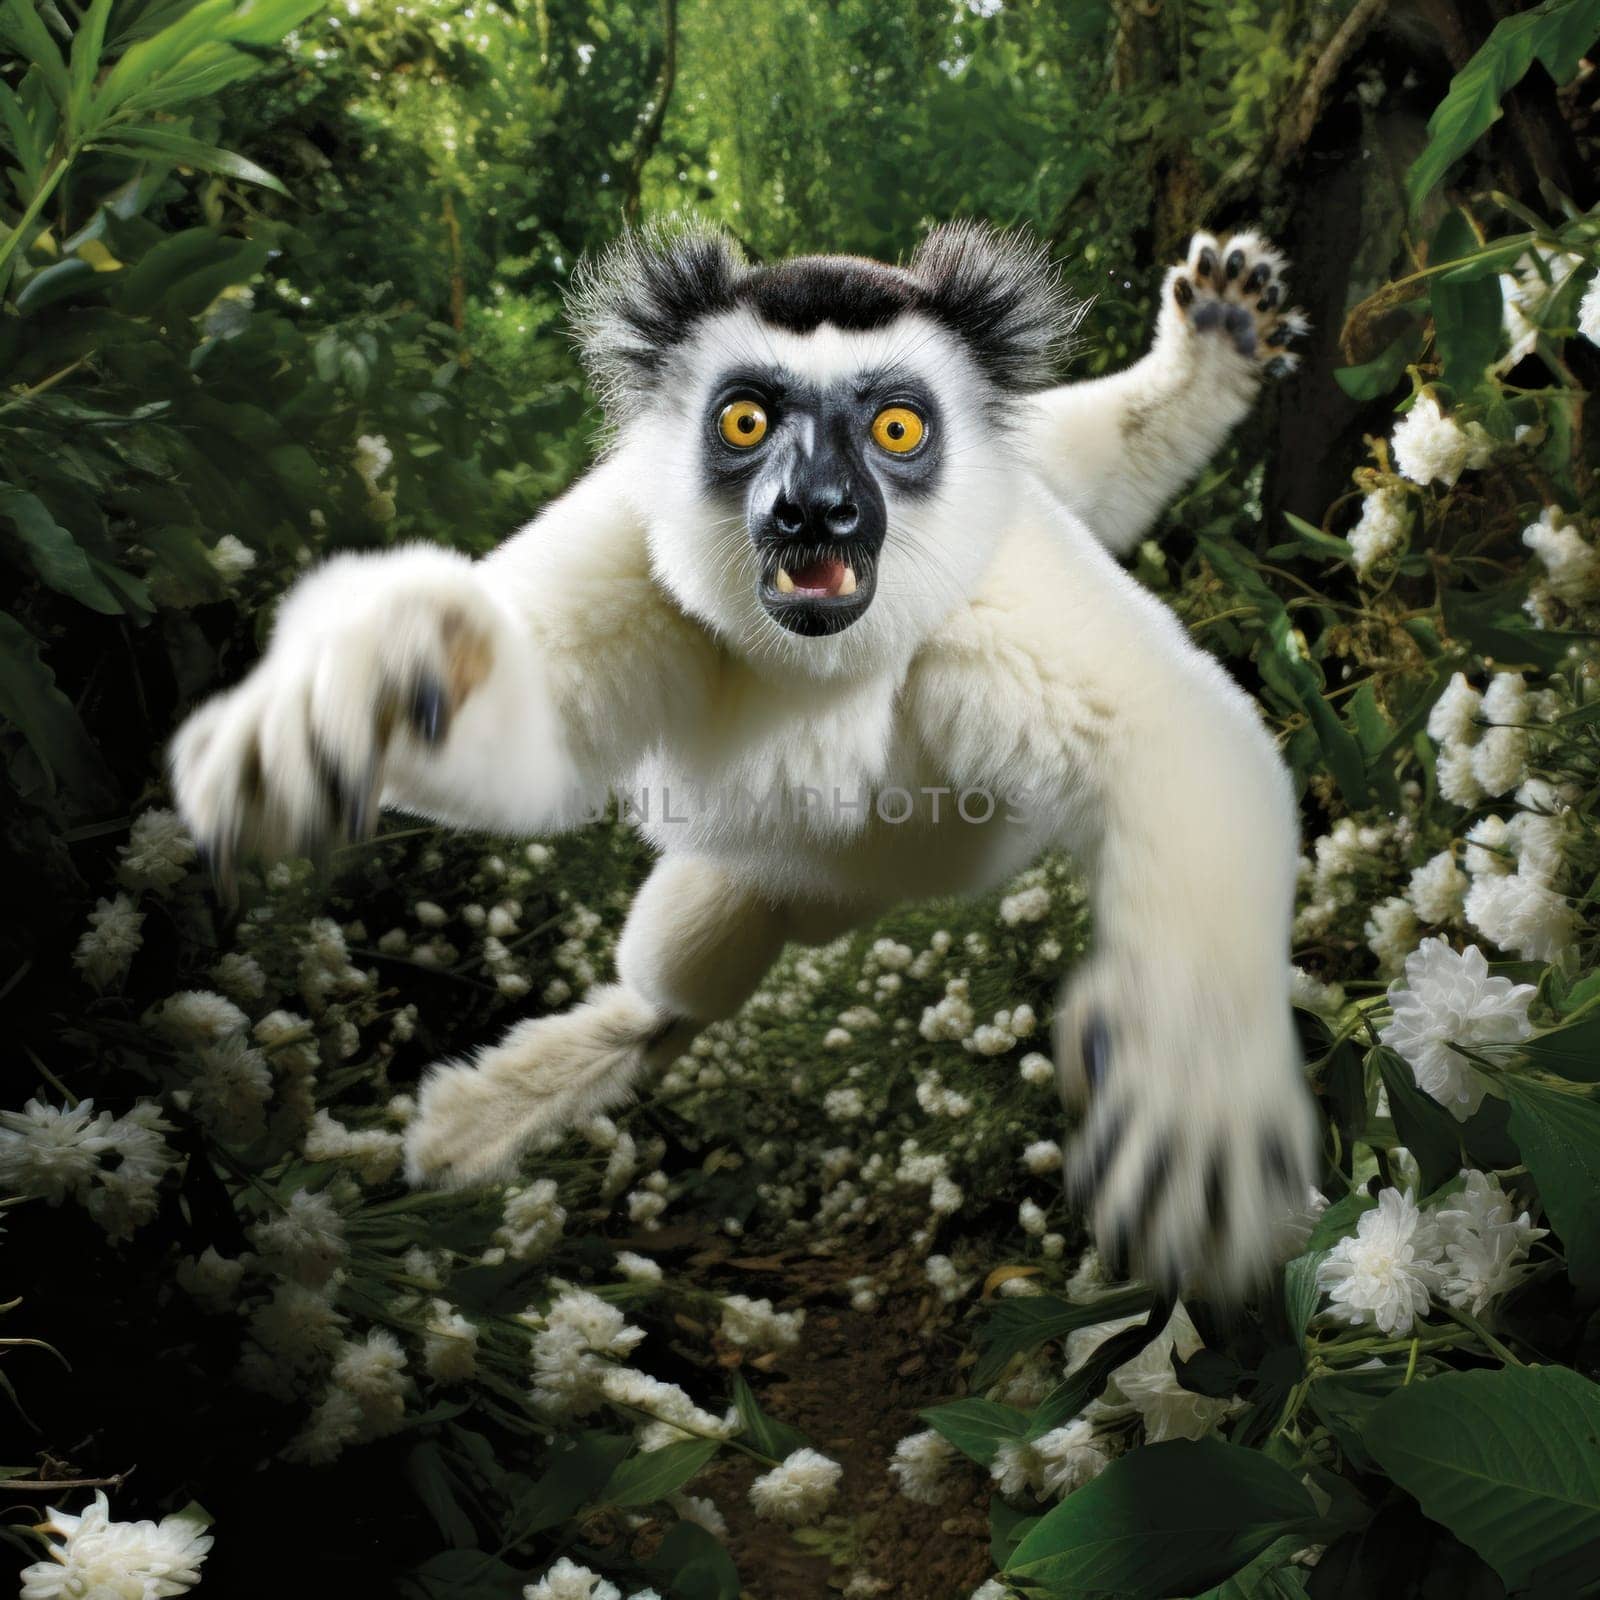 A lemur is running through a forest of flowers and leaves, AI by starush